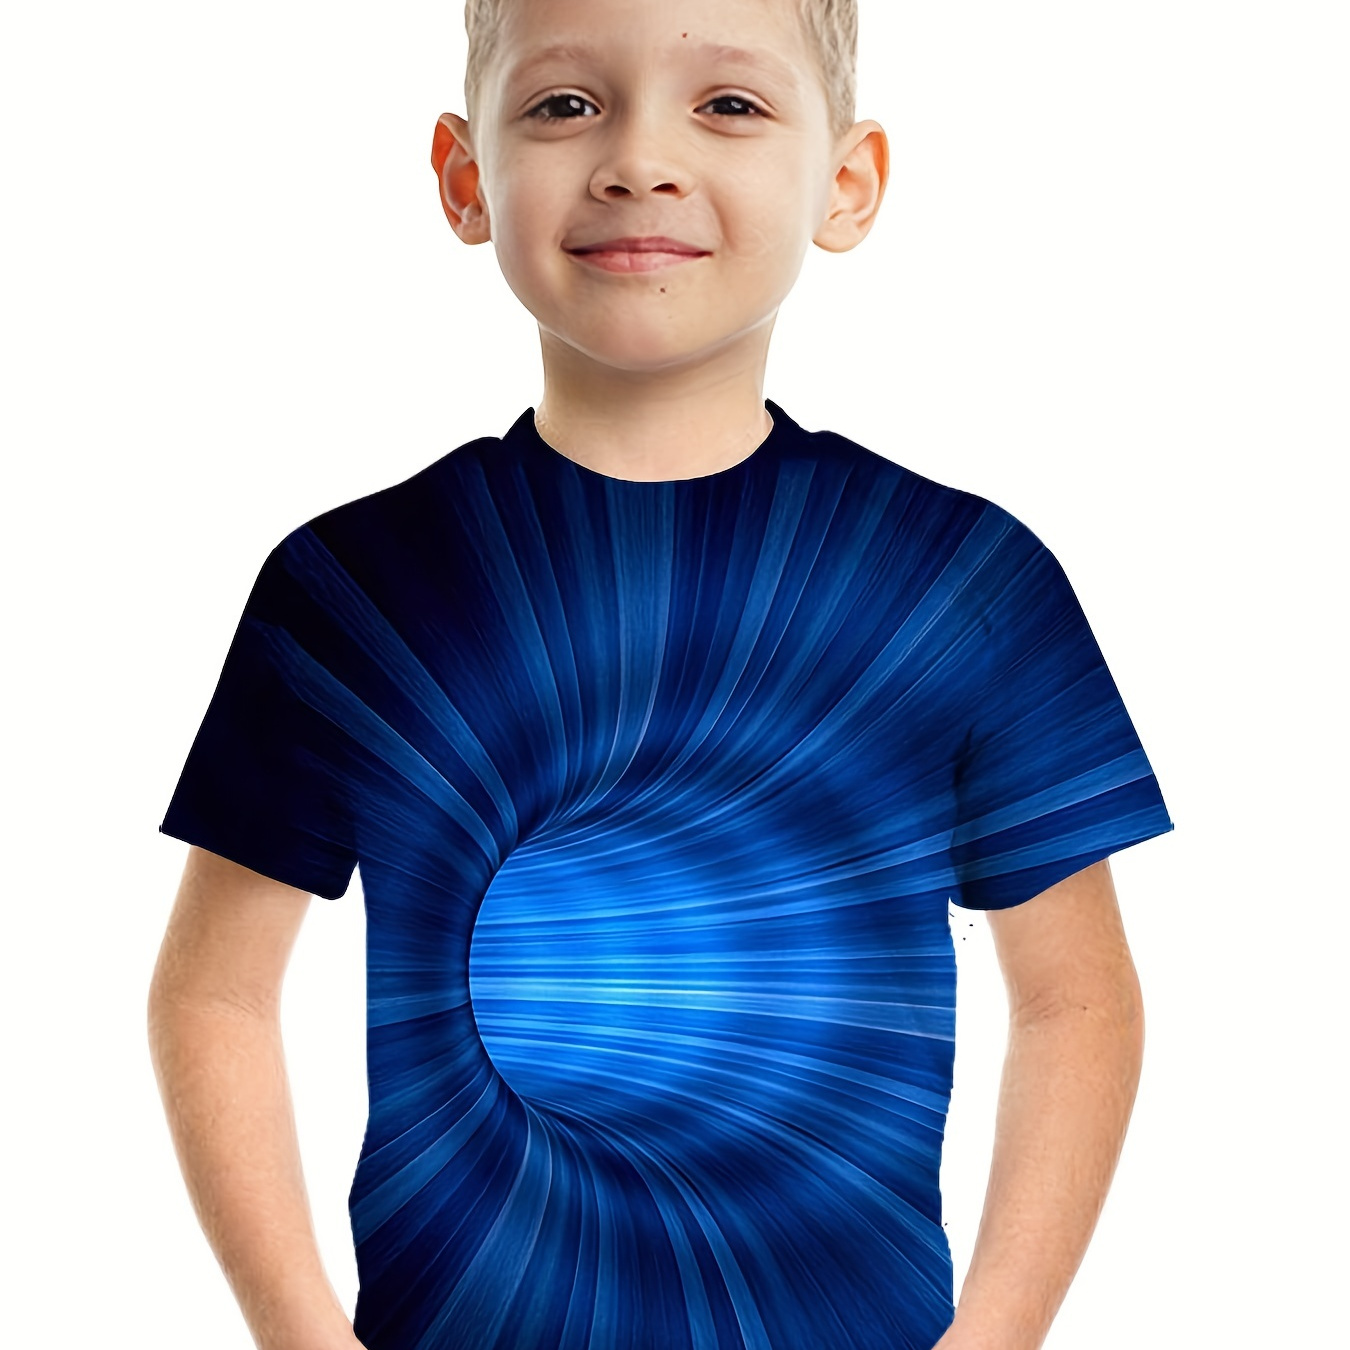 

Fashion Optical Illusion 3d Print Boys Creative T-shirt, Casual Lightweight Comfy Short Sleeve Tee Tops, Kids Clothings For Summer